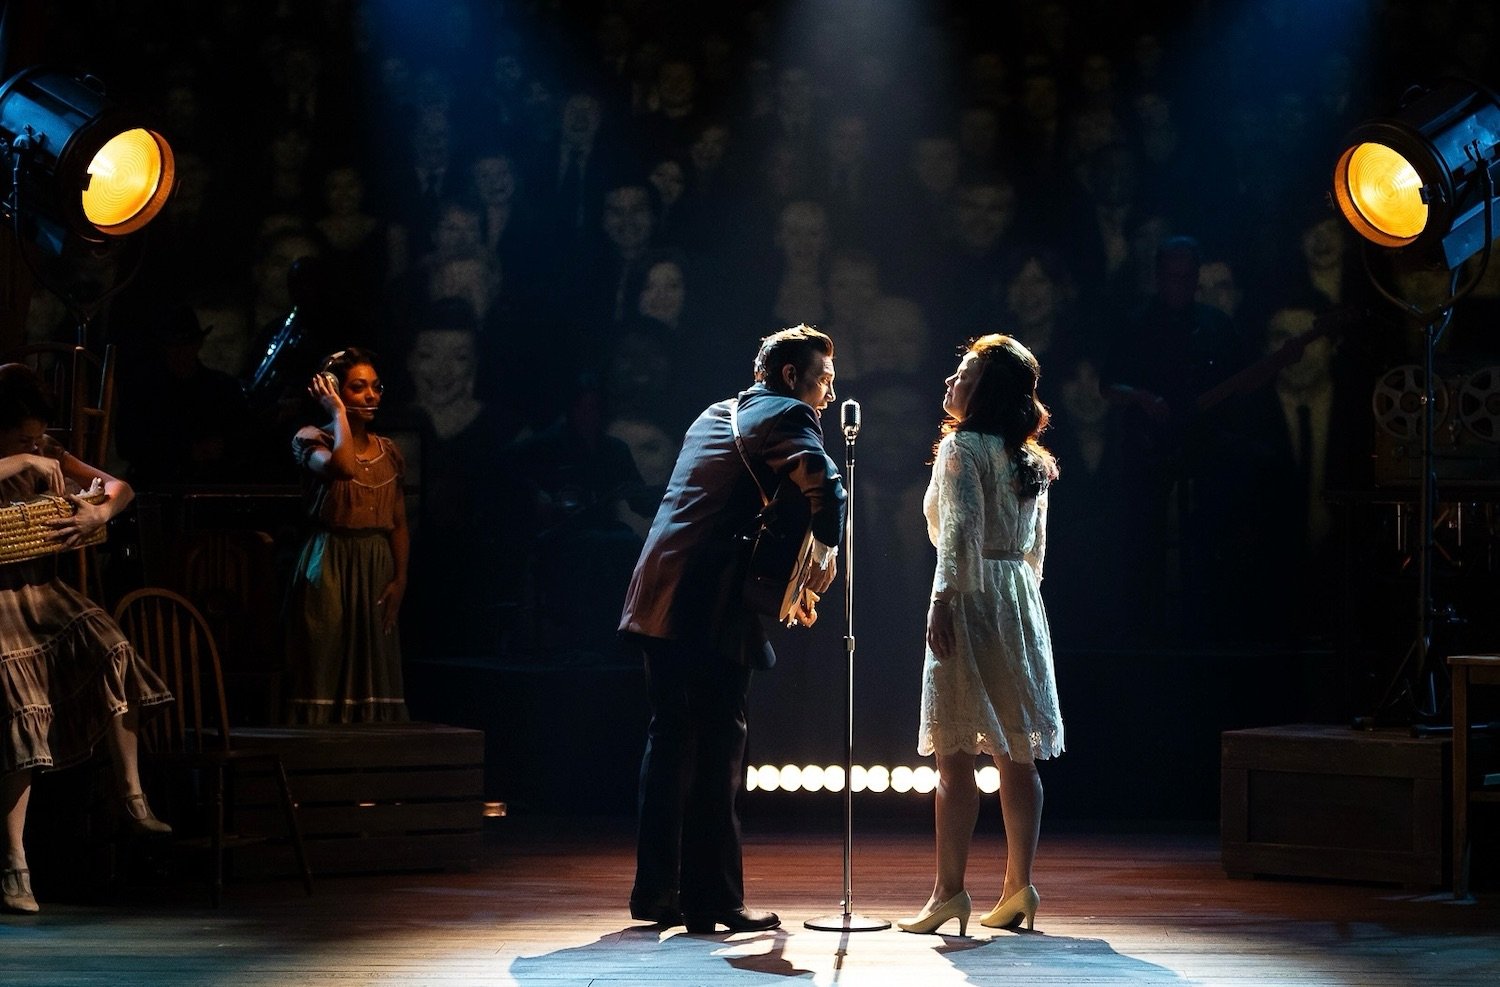 Things to do this weekend in San Diego including a new theater production of The Ballad of Johnny and June at the La Jolla Playhouse premiering this weekend